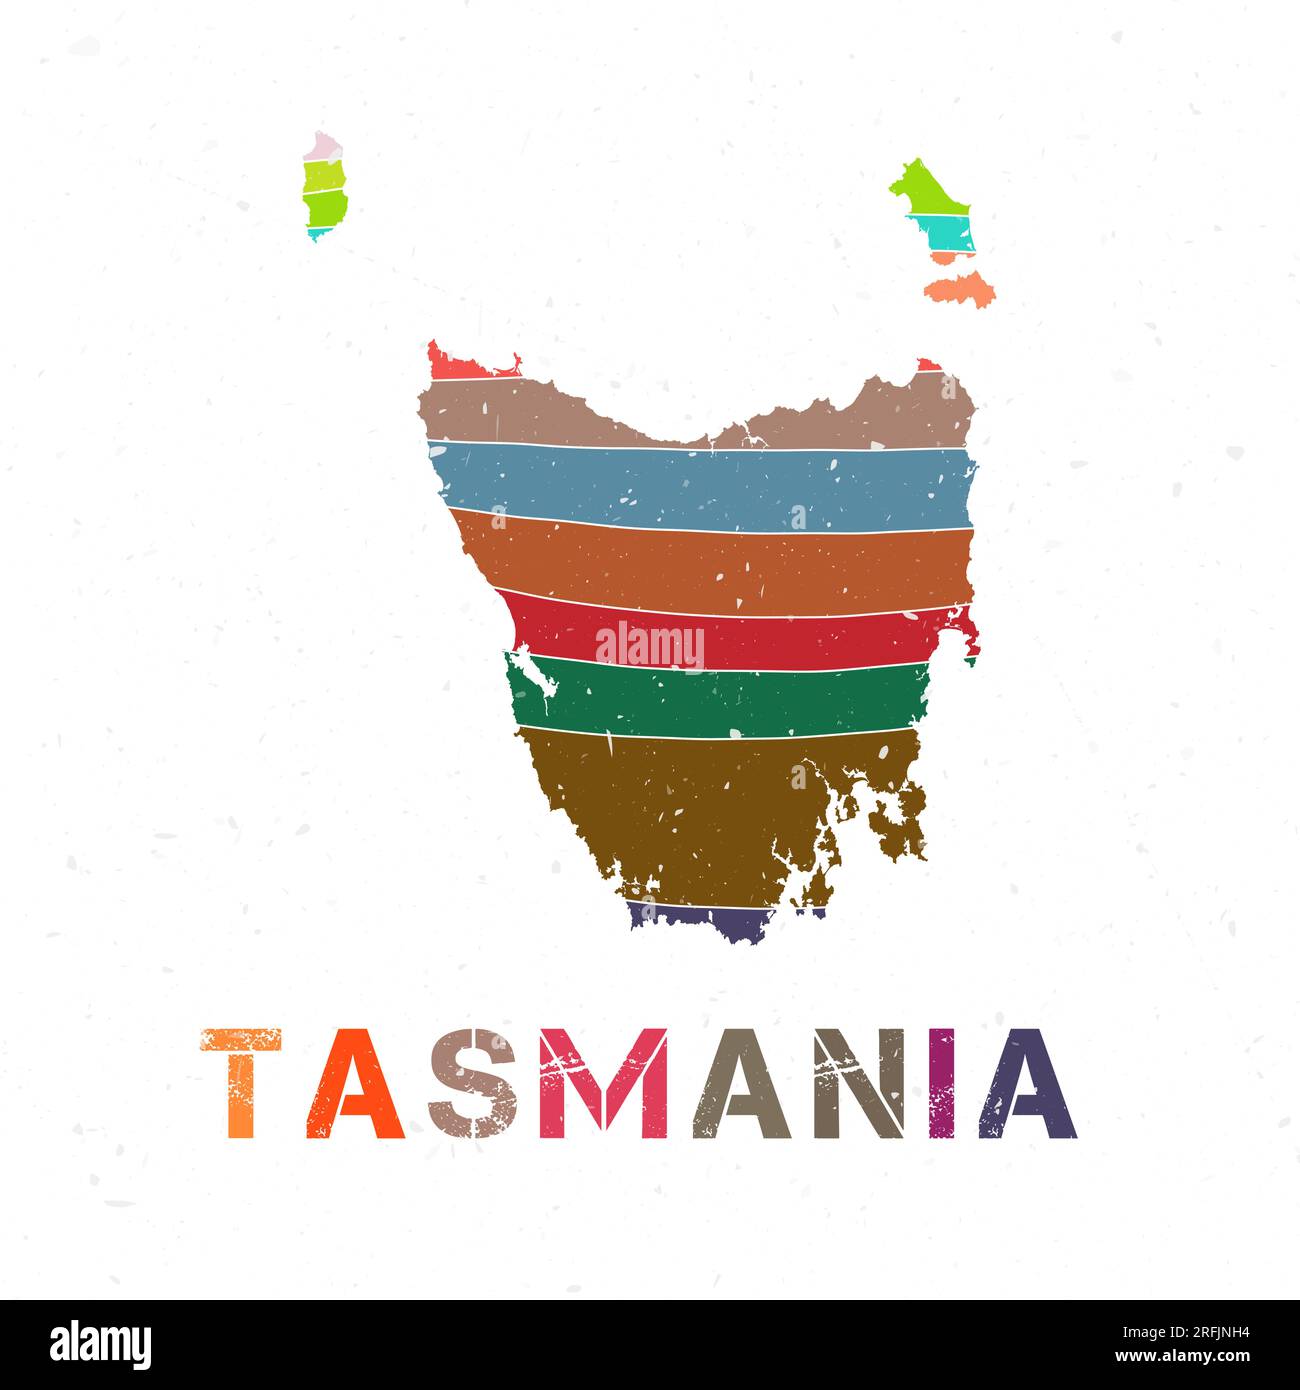 Tasmania map design. Shape of the island with beautiful geometric waves and grunge texture. Classy vector illustration. Stock Vector